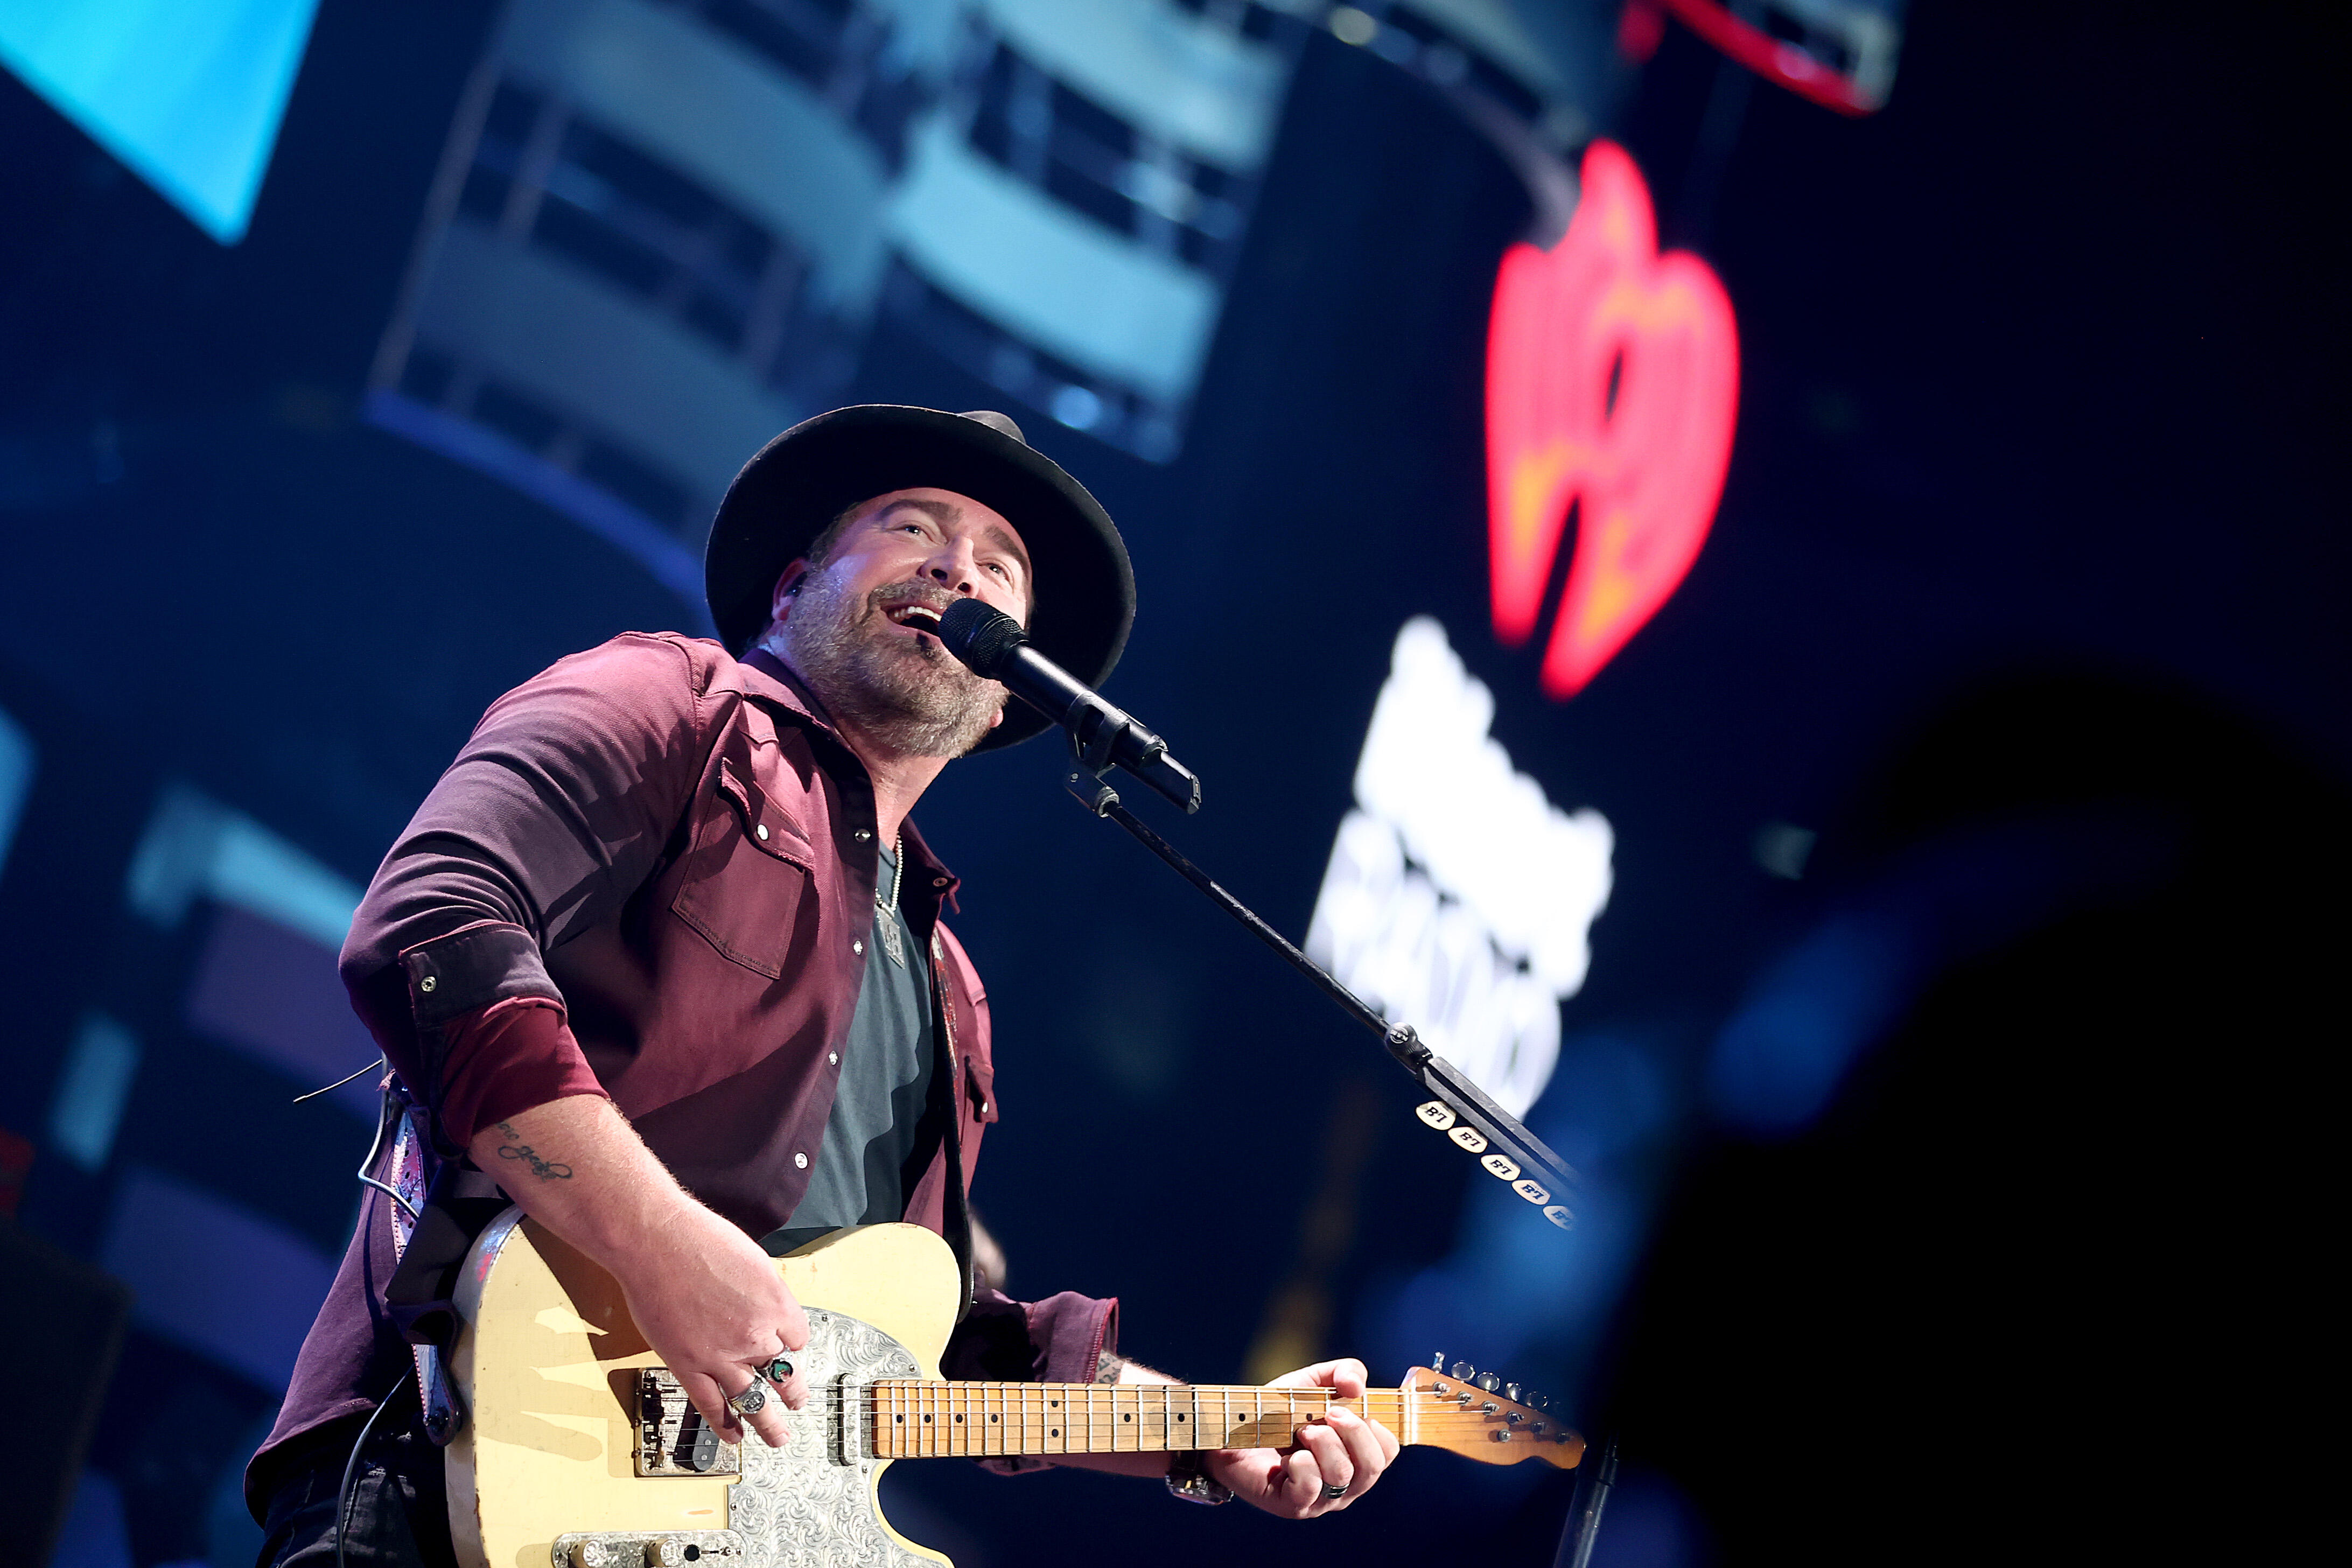 Lee Brice Proves He Knows How To Party In His Latest Music Video |  iHeartCountry Radio